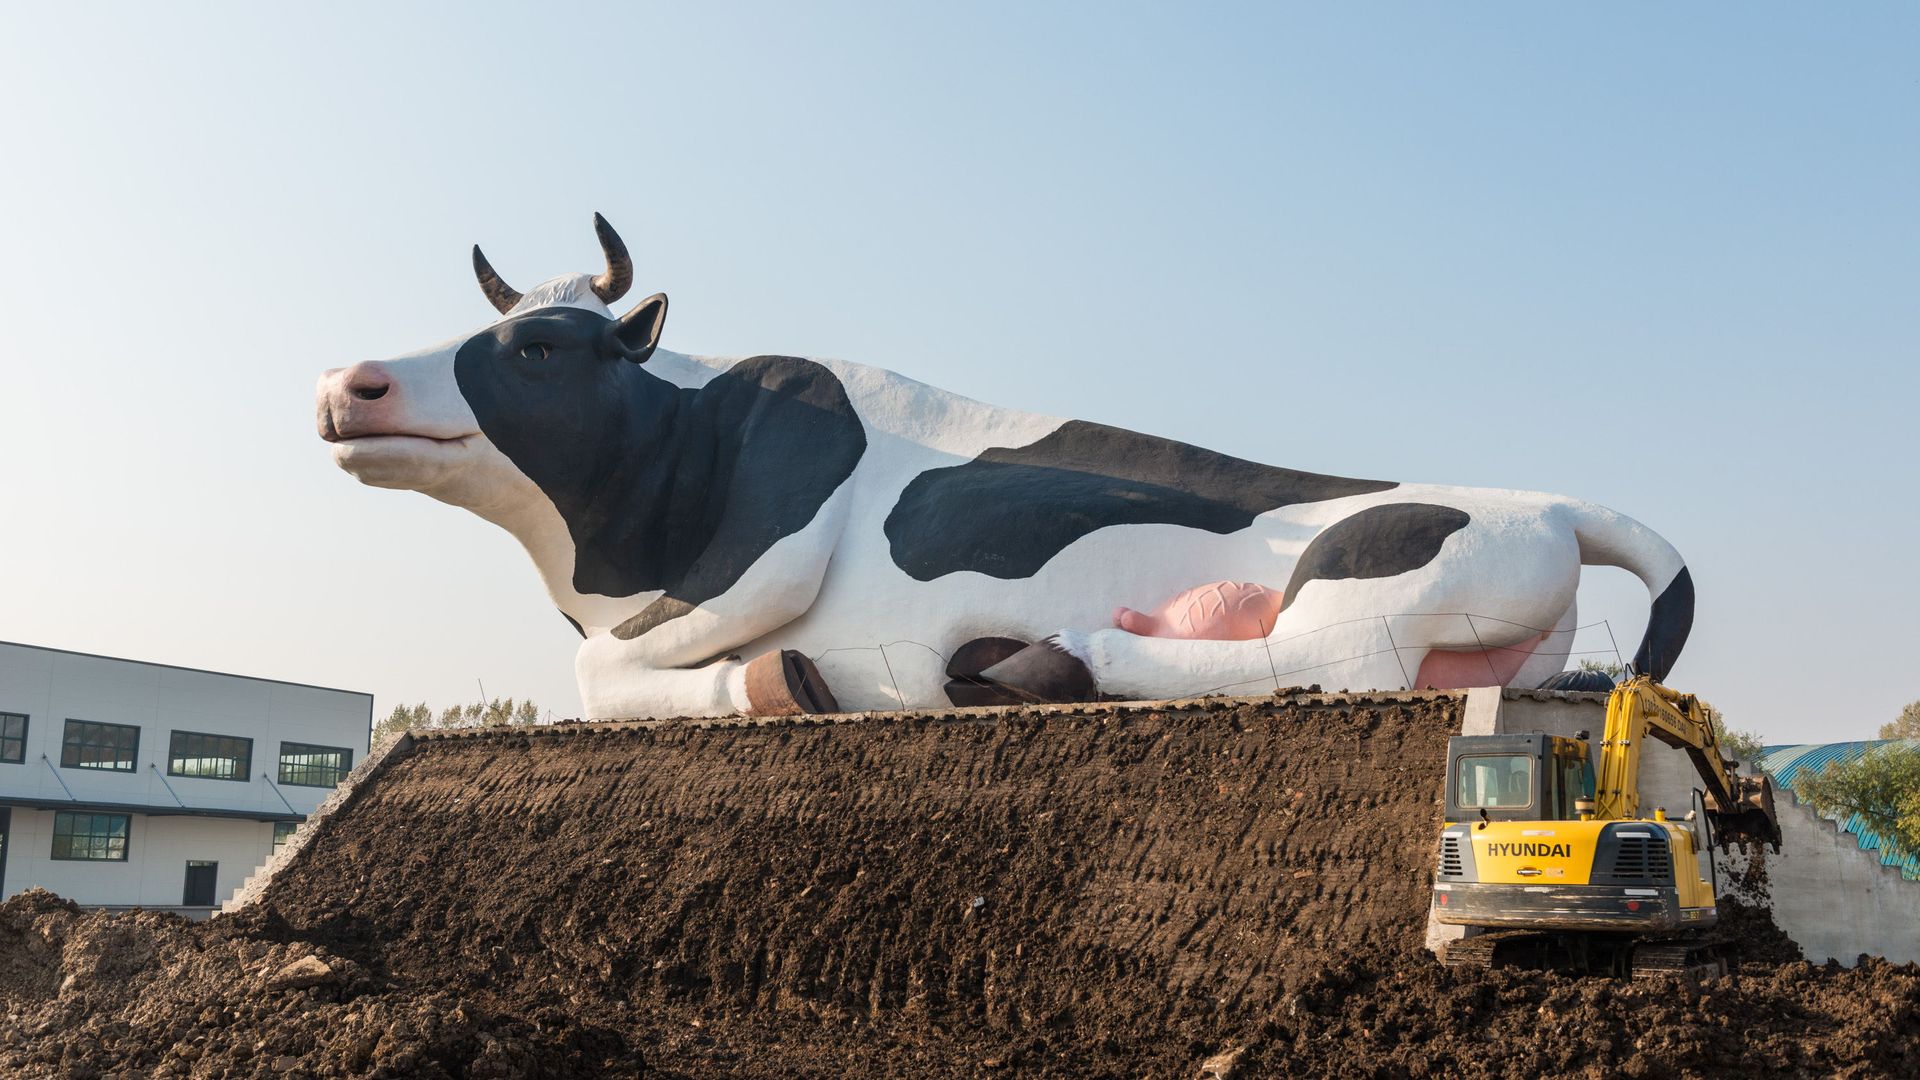 A giant dairy cattle statue.